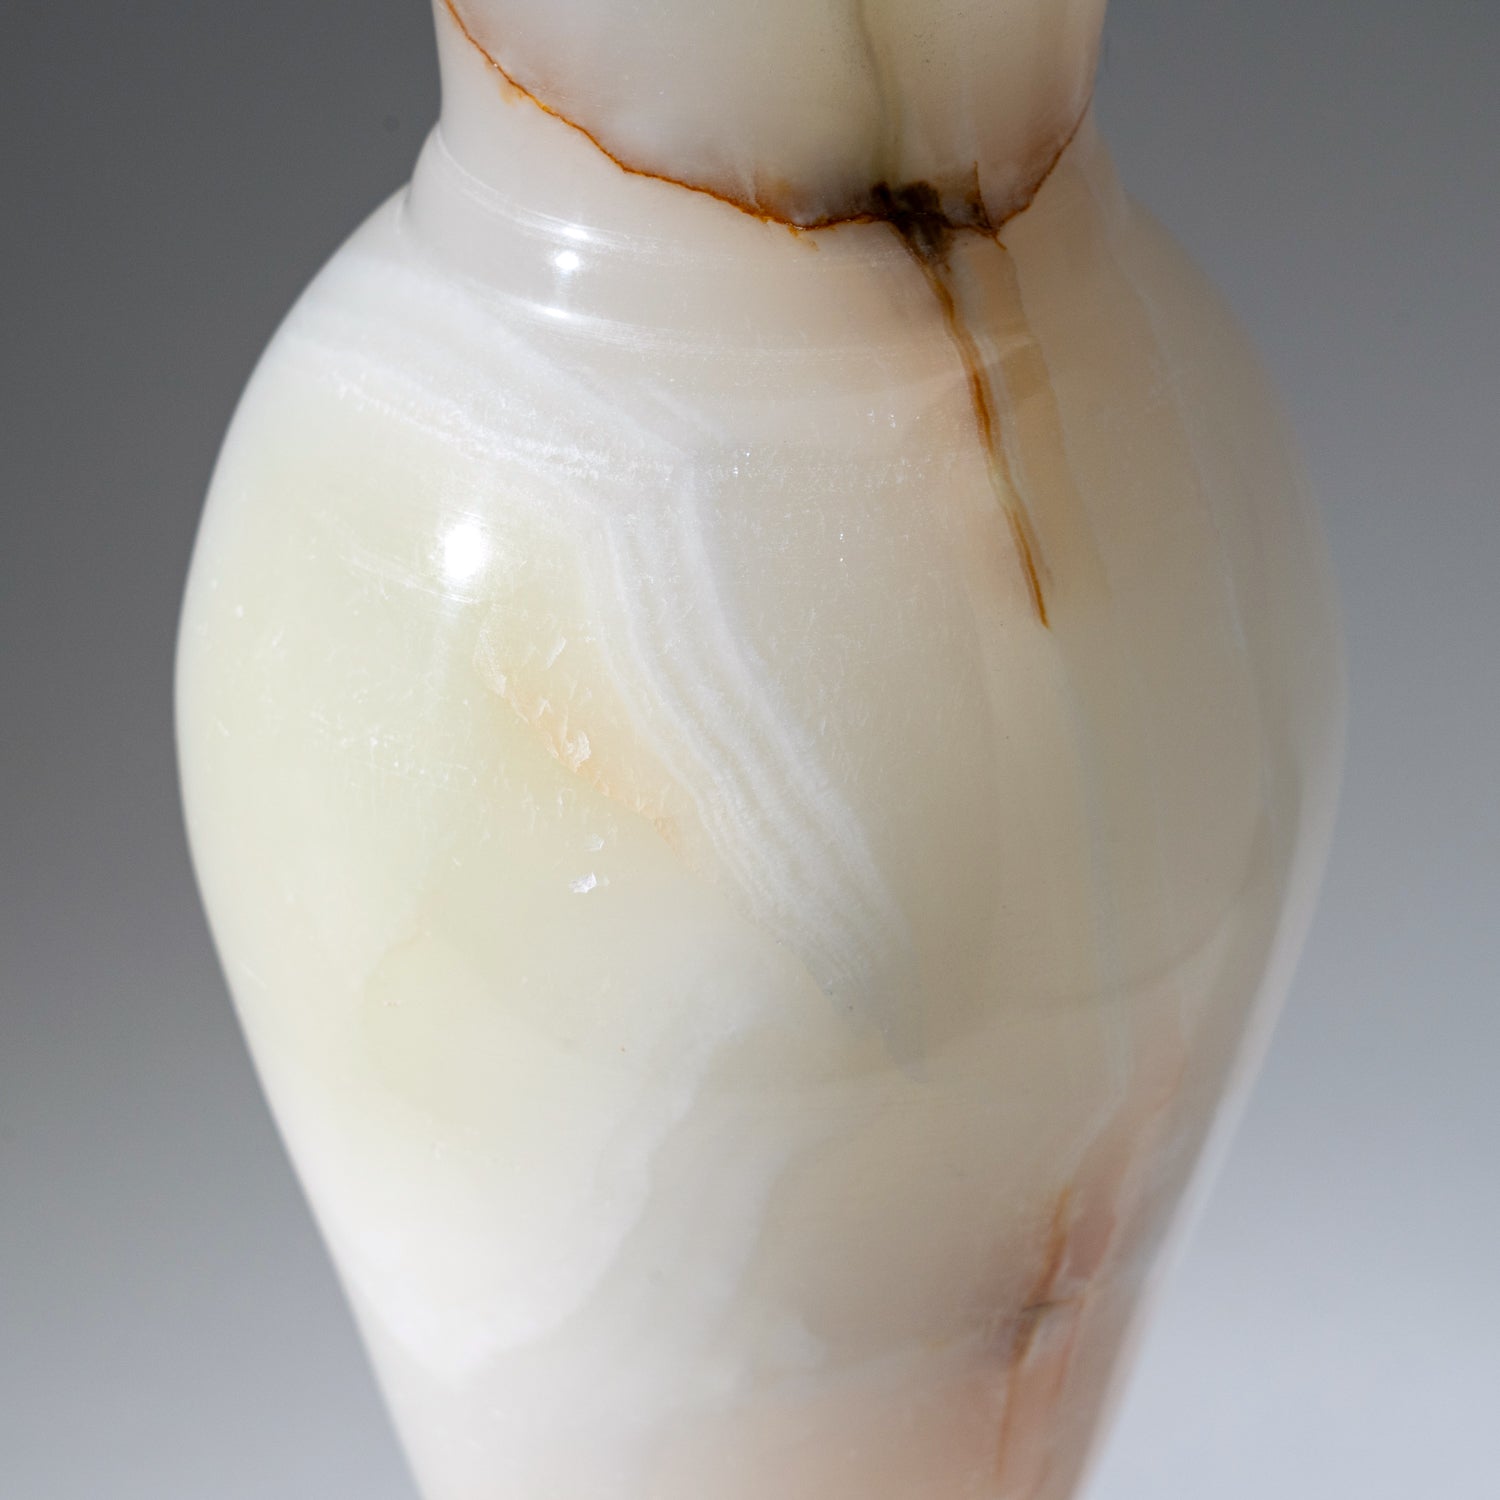 Genuine Polished Onyx Flower Vase from Mexico (4.5 lbs)